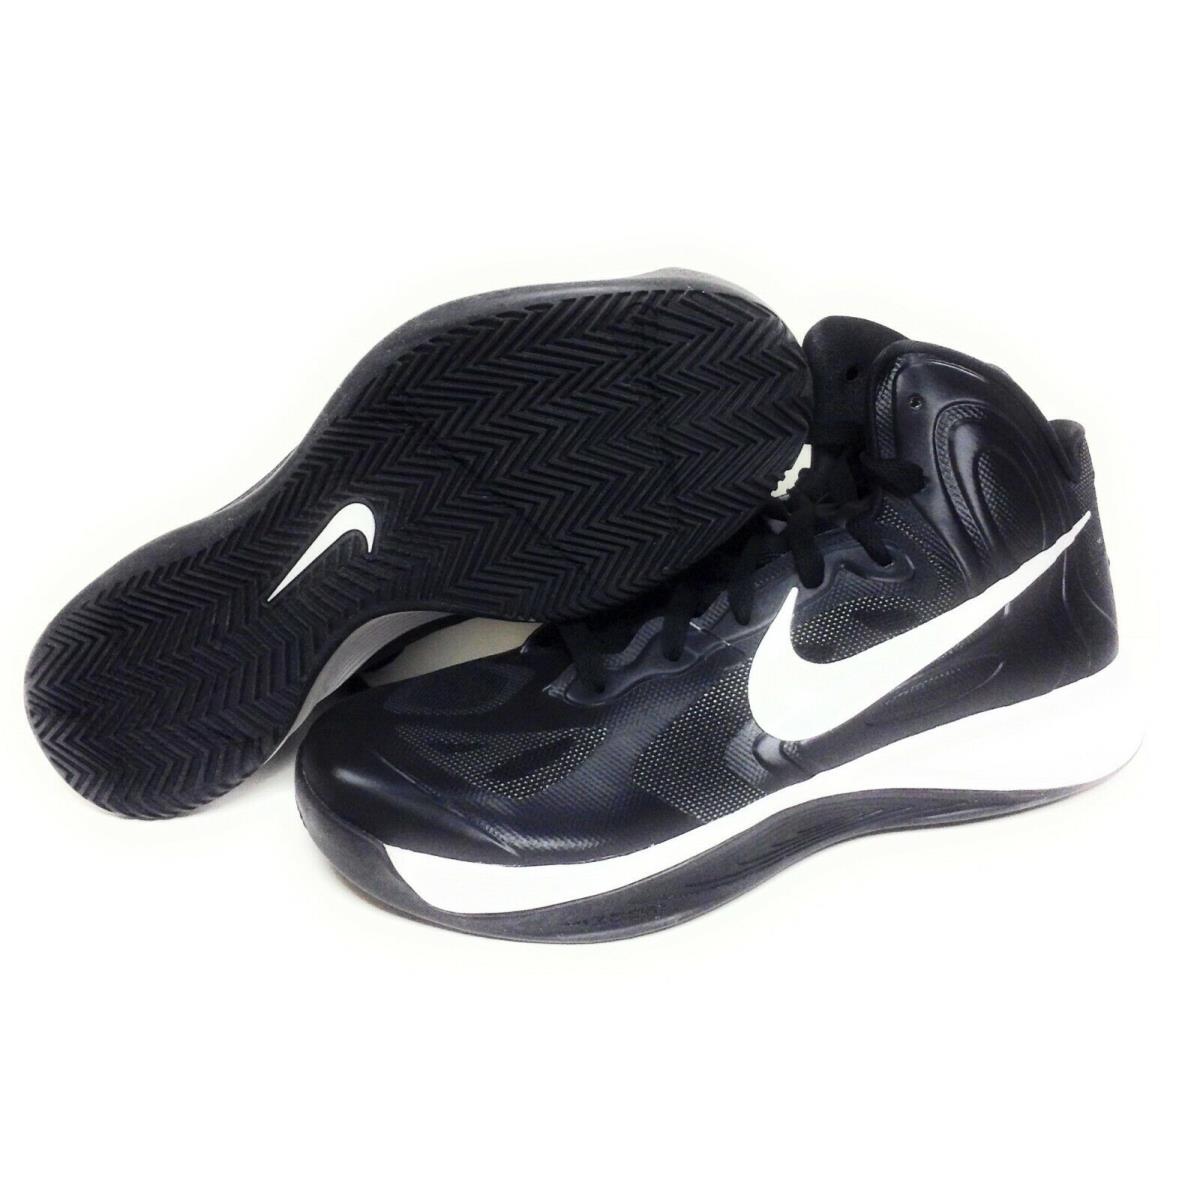 Mens Nike Hyperfuse TB 525019 001 Black White Basketball 2012 Sneakers Shoes